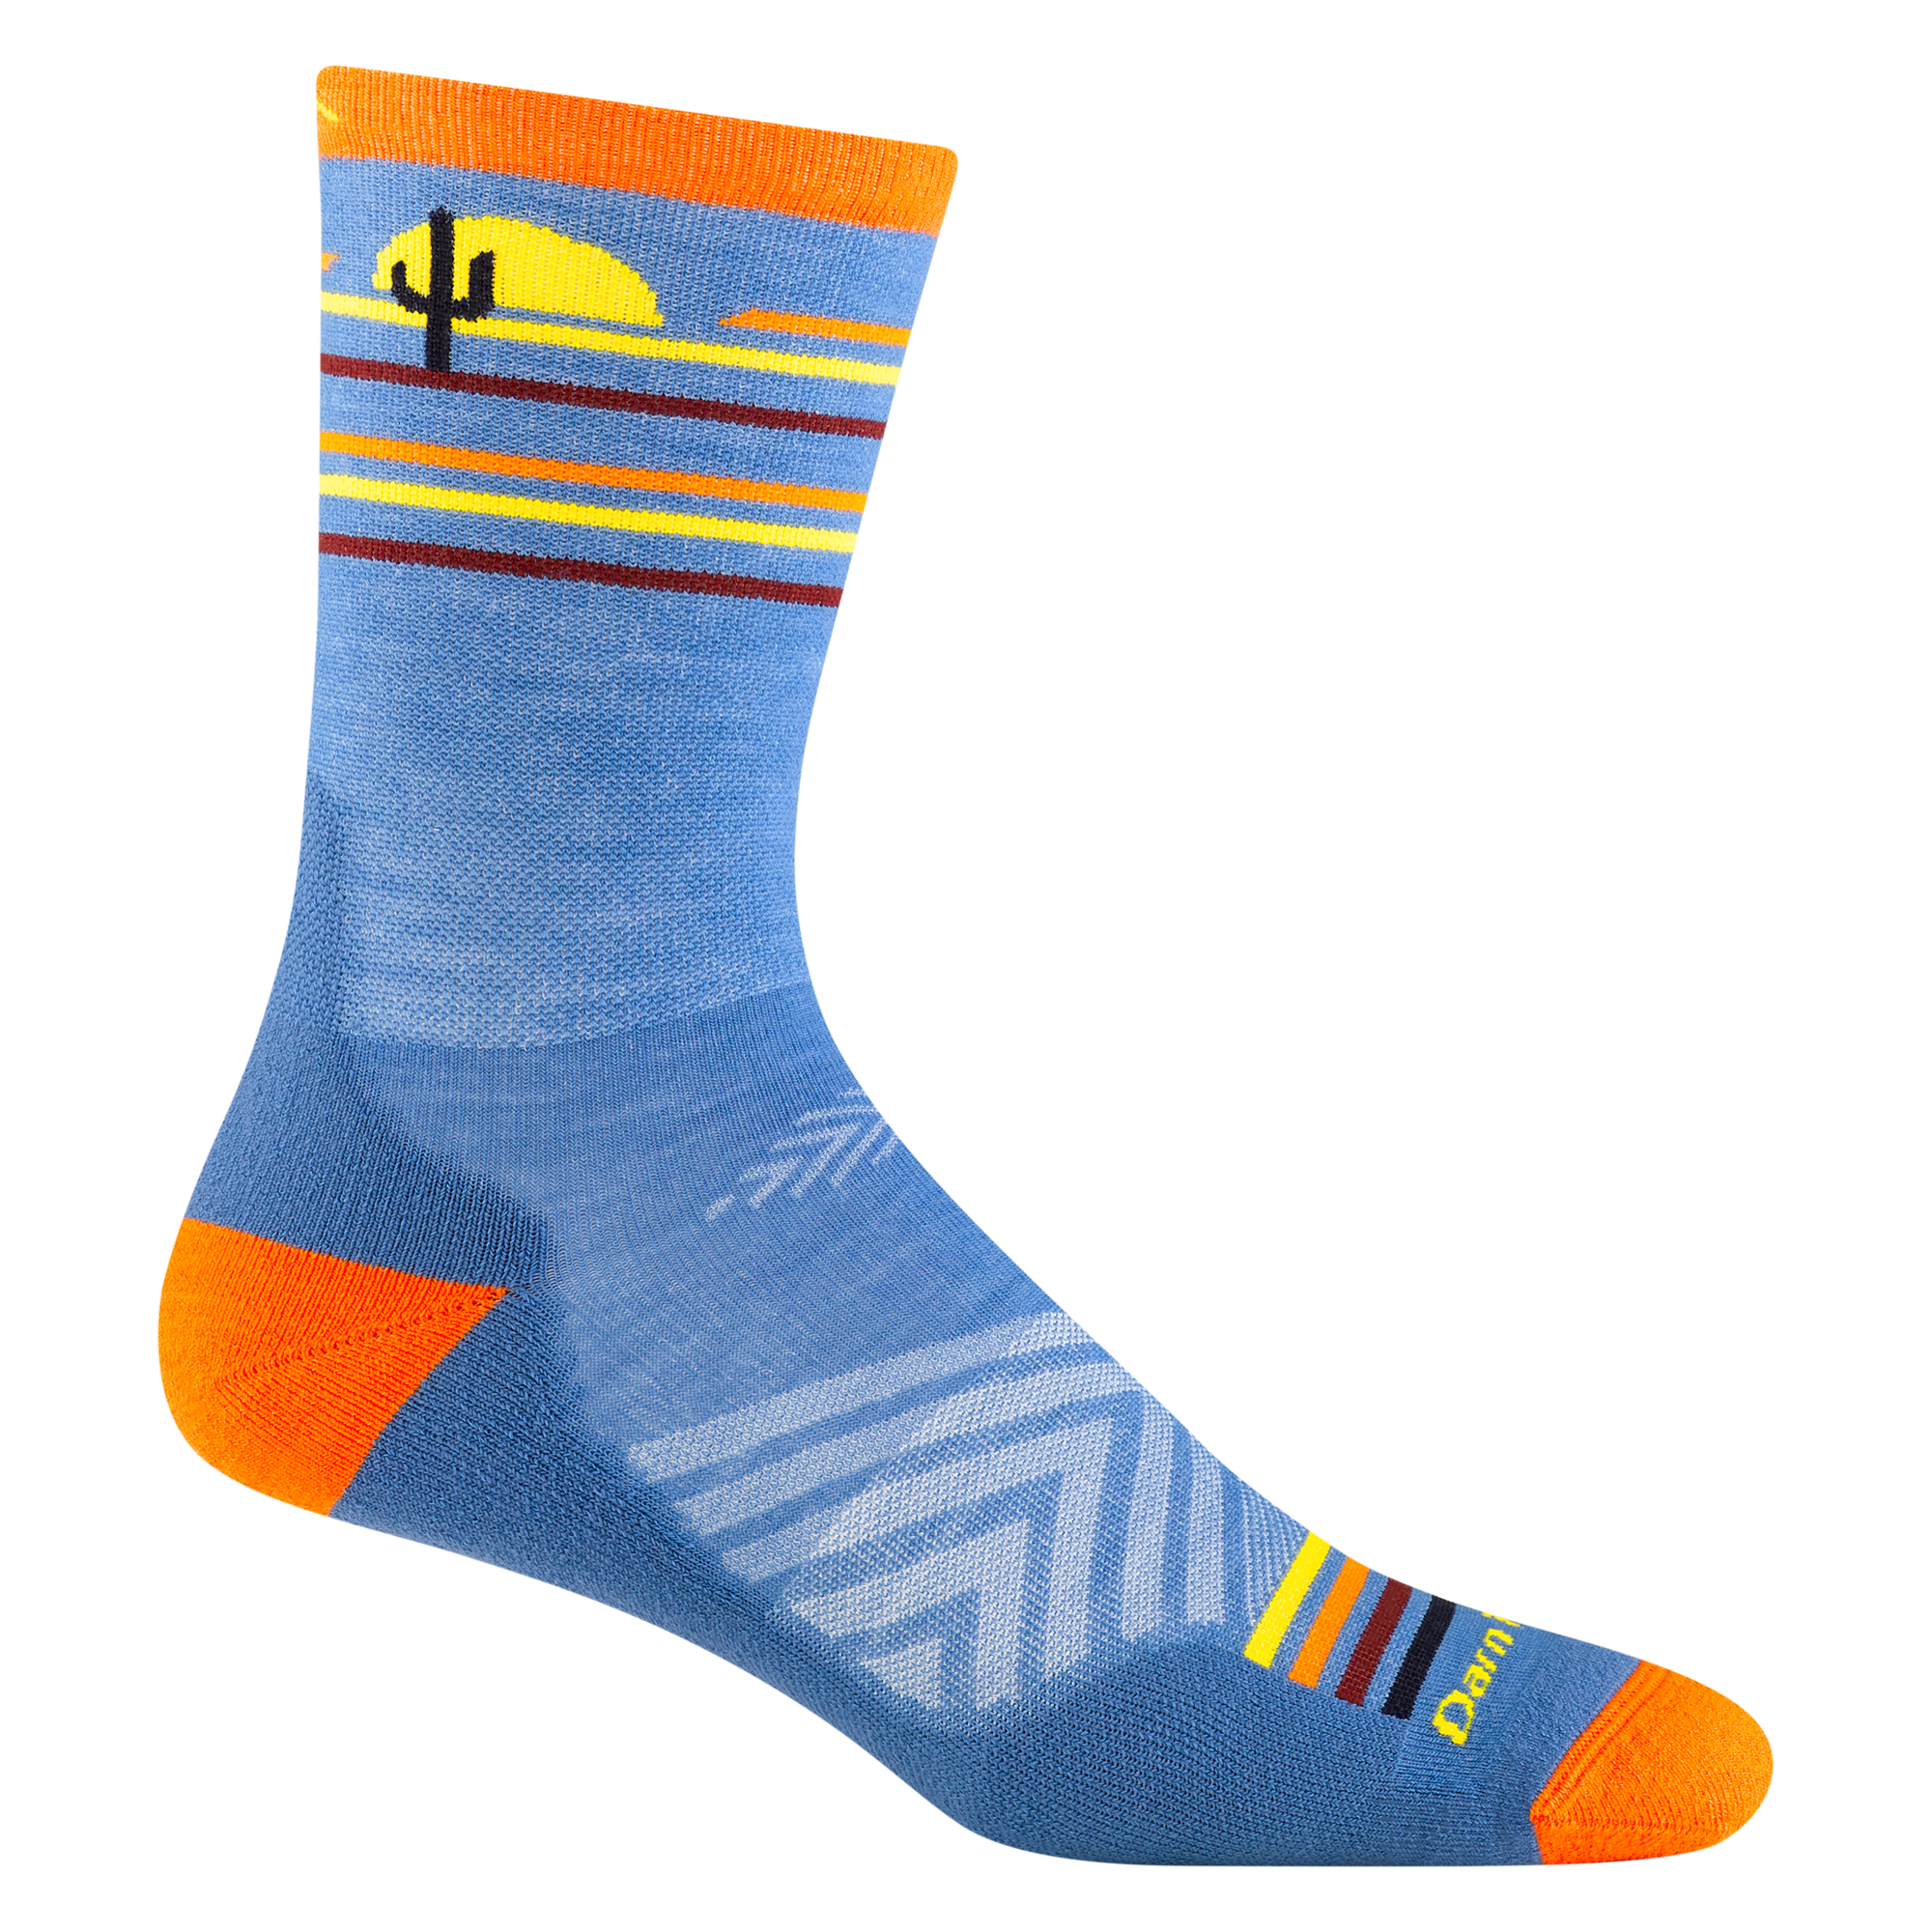 Reverse side of the men's frontrunner micro crew running sock in surf blue with red/yellow/orange stripes and a cactus